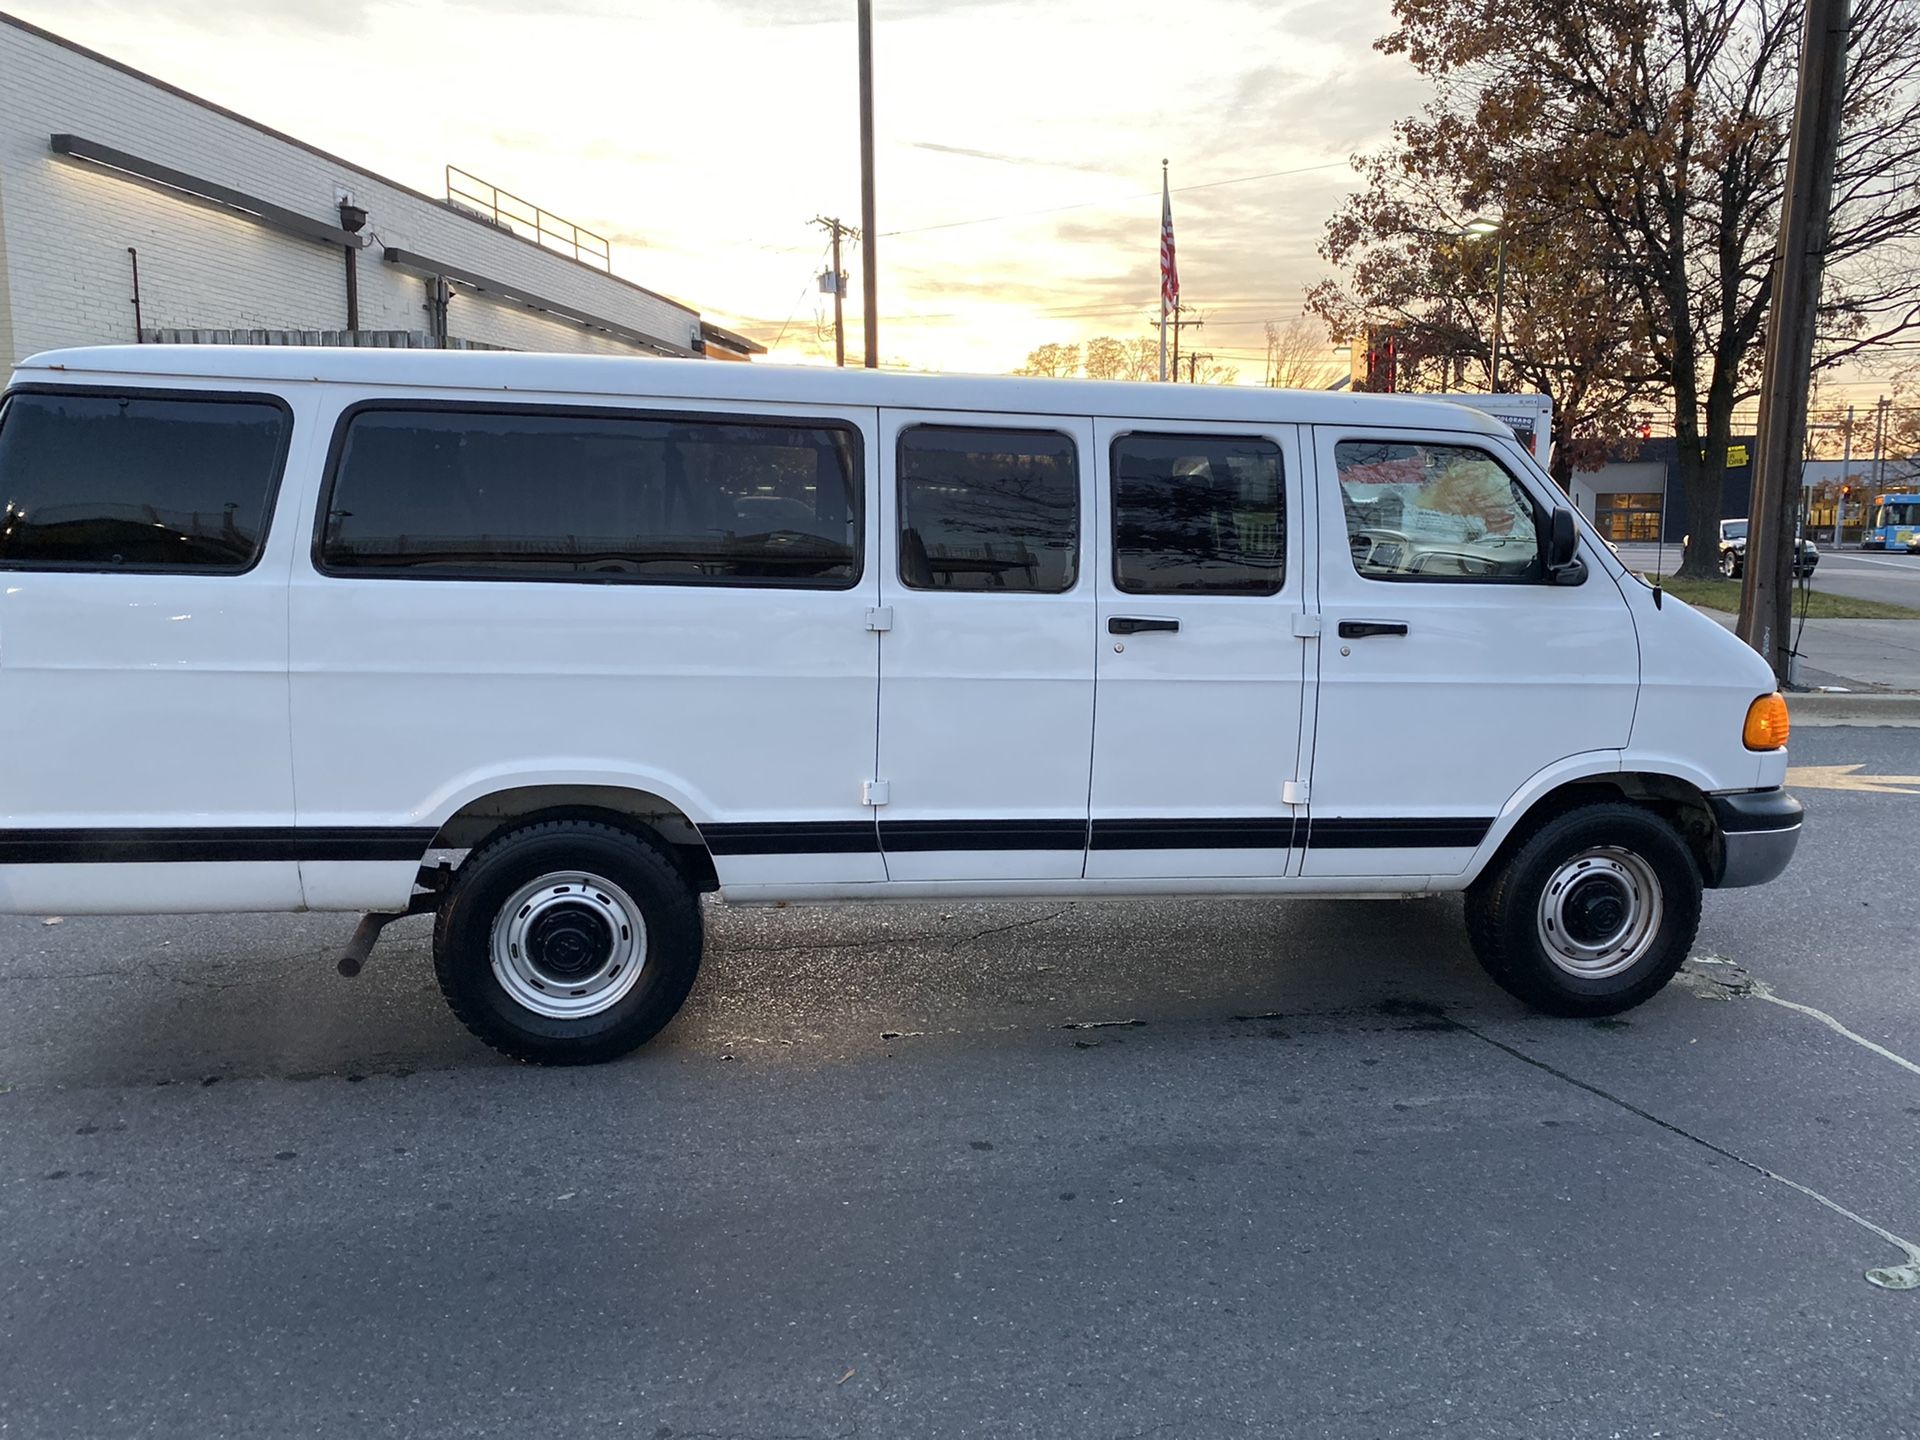 2003 Dodge 15 passenger van 3500 series 47,000 miles original in very good condition runs and drives excellent everything works perfect